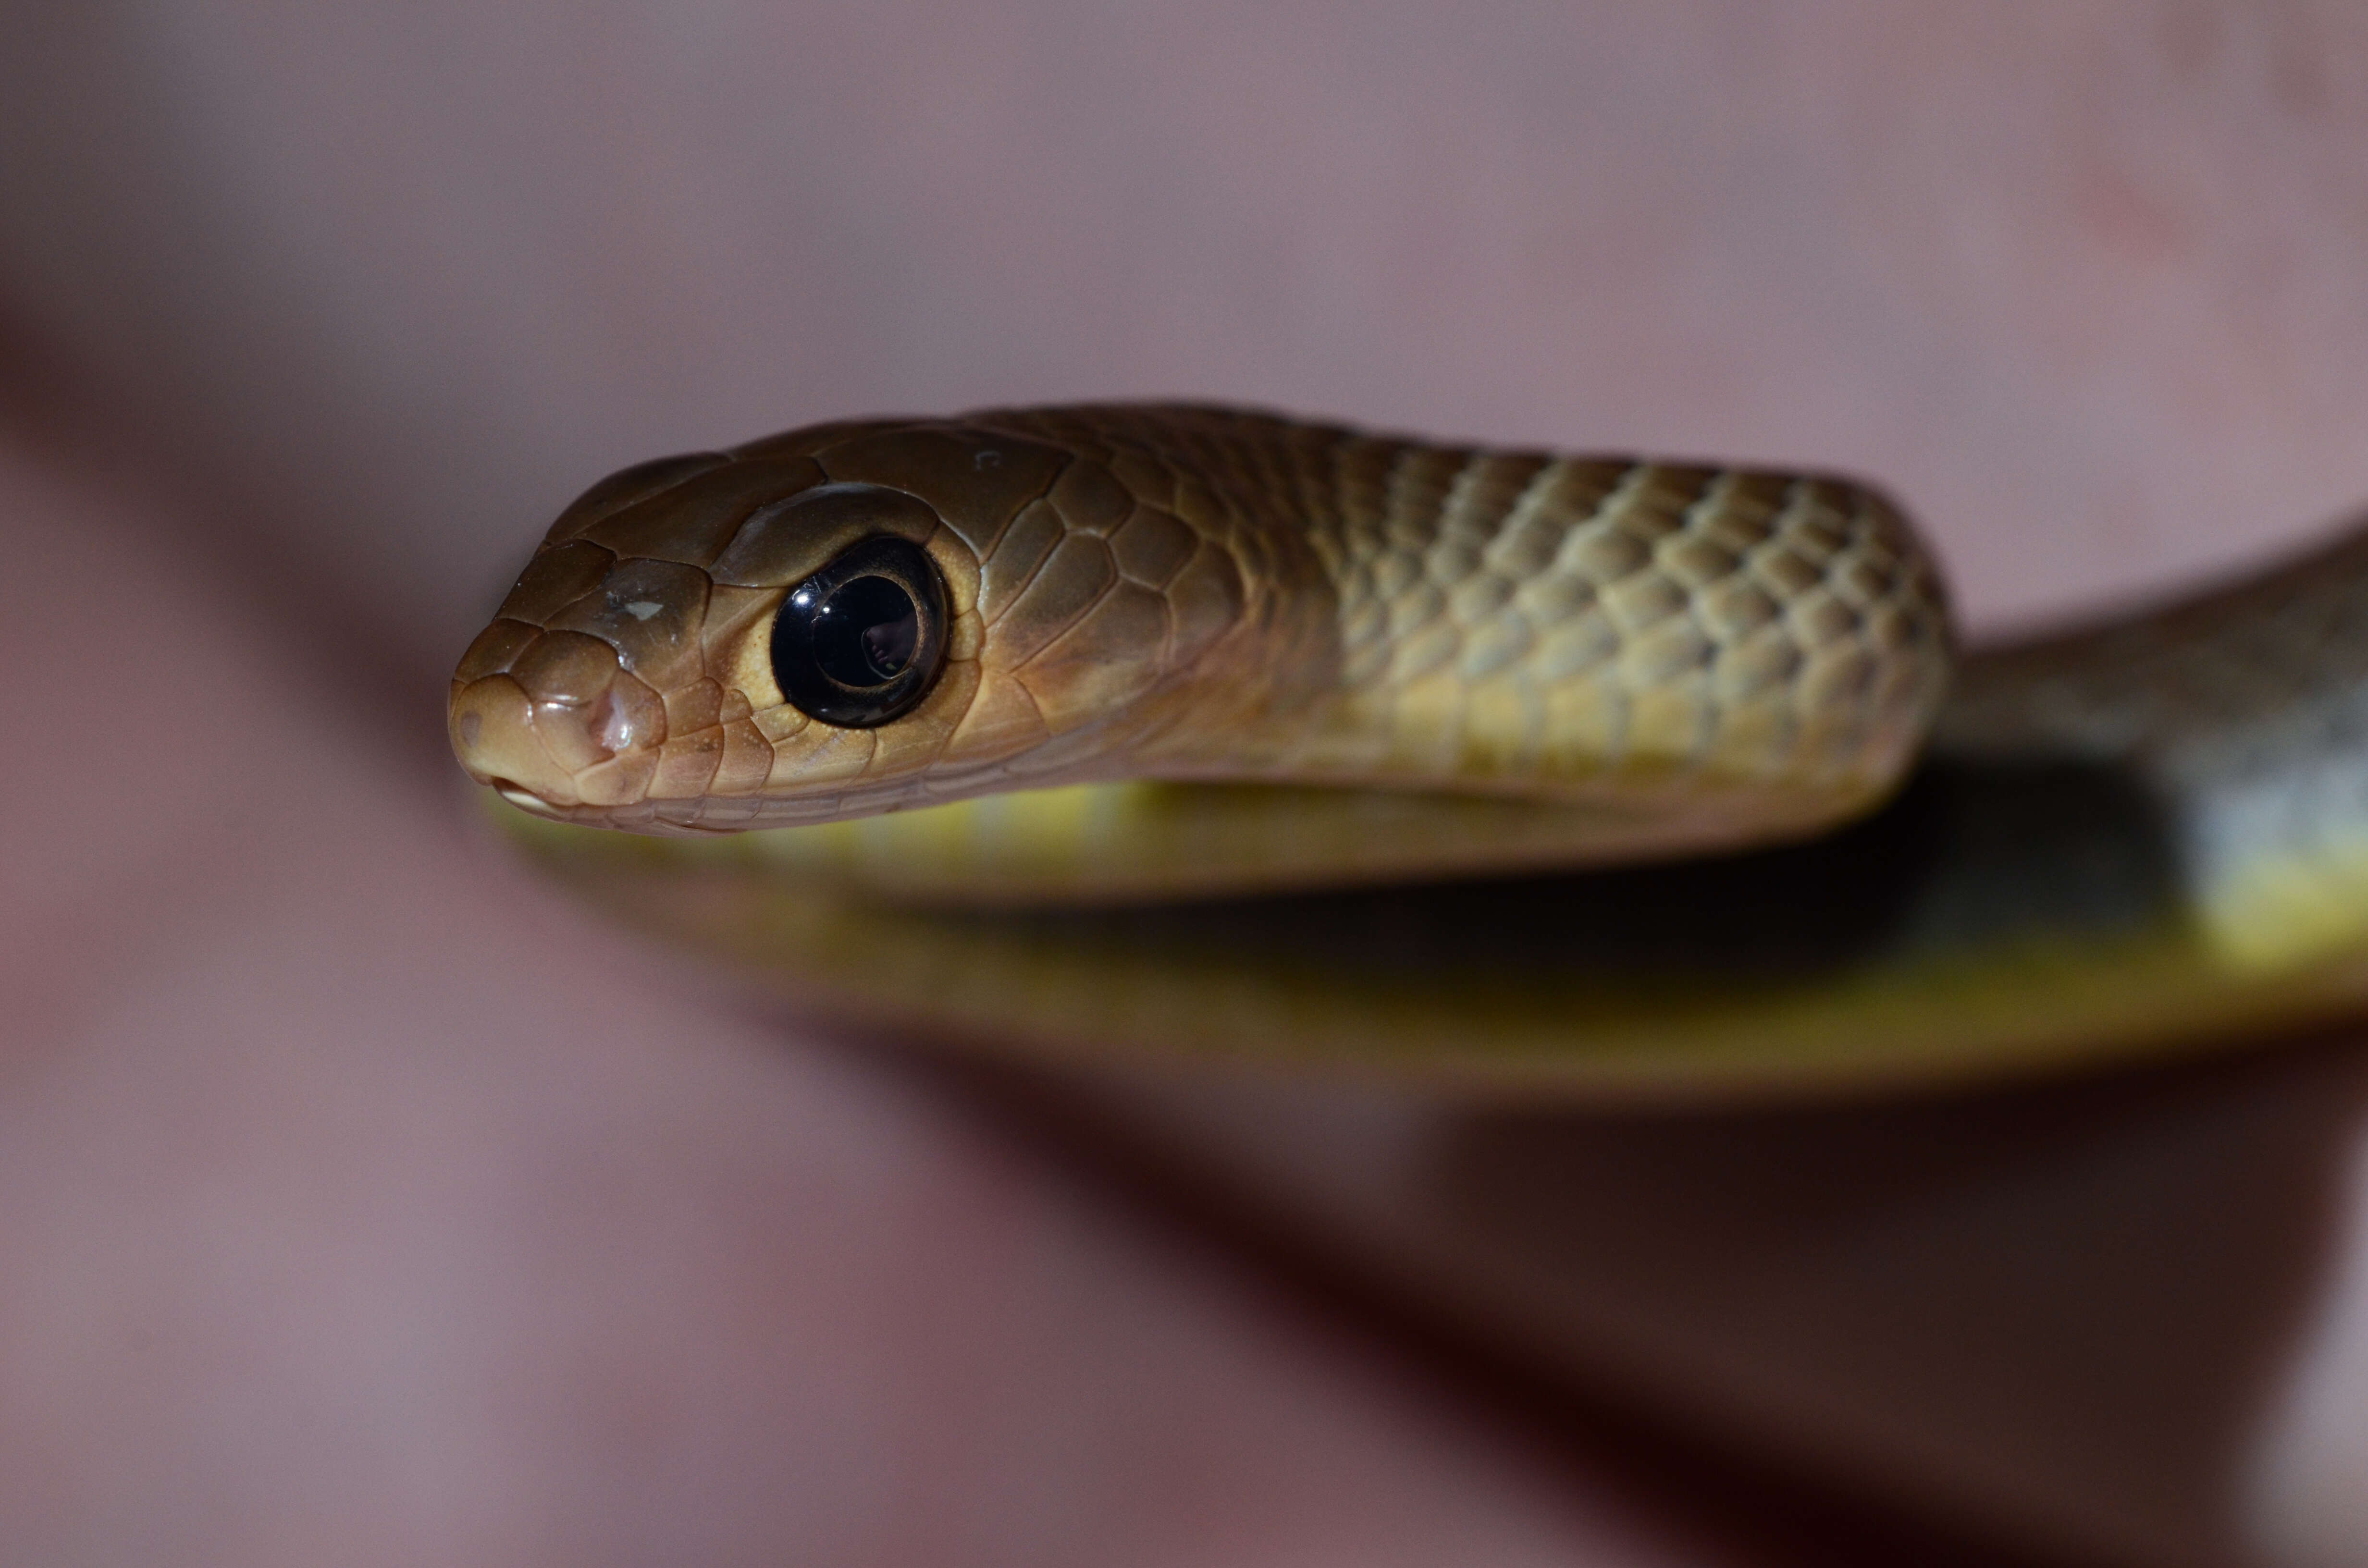 Image of Asian Rat Snakes